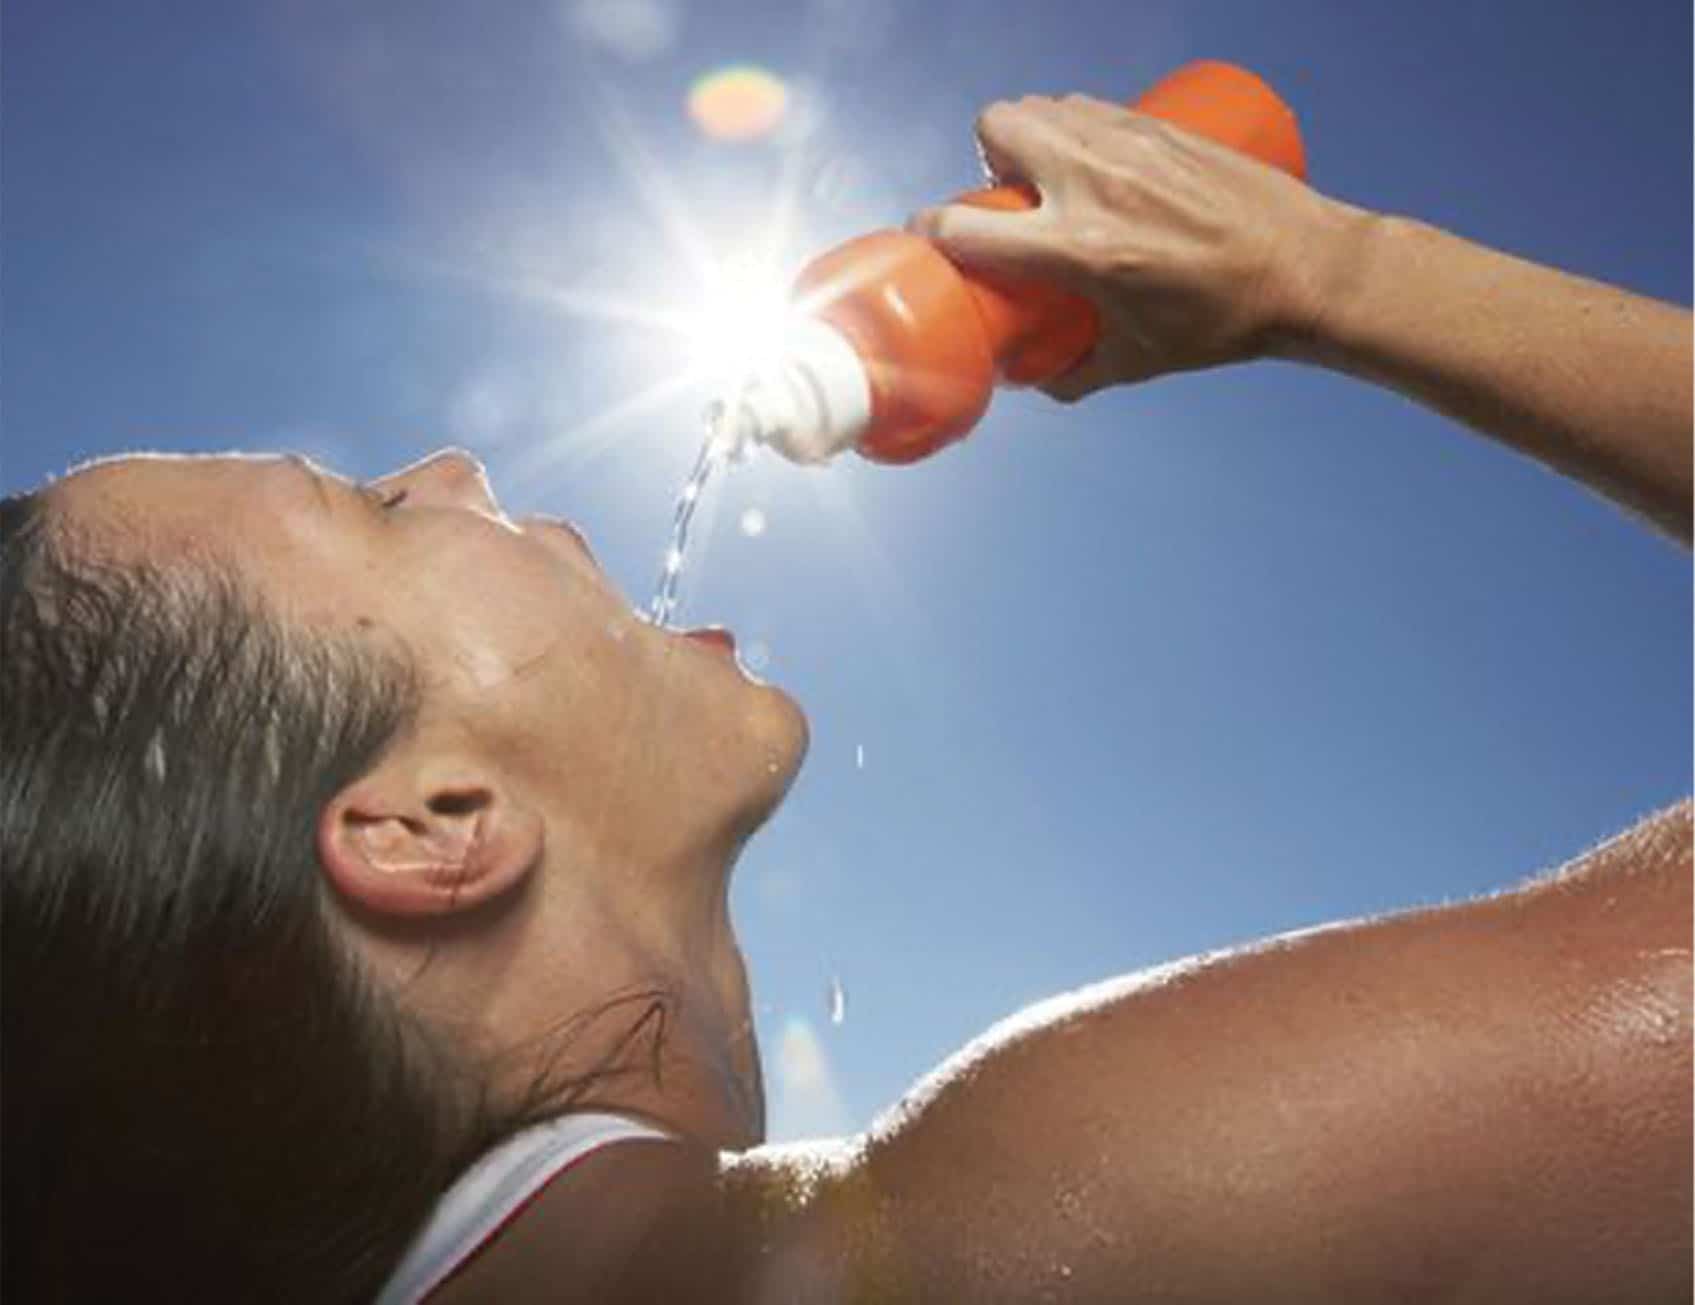 Mobile Phlebotomy The Importance of Staying Hydrated